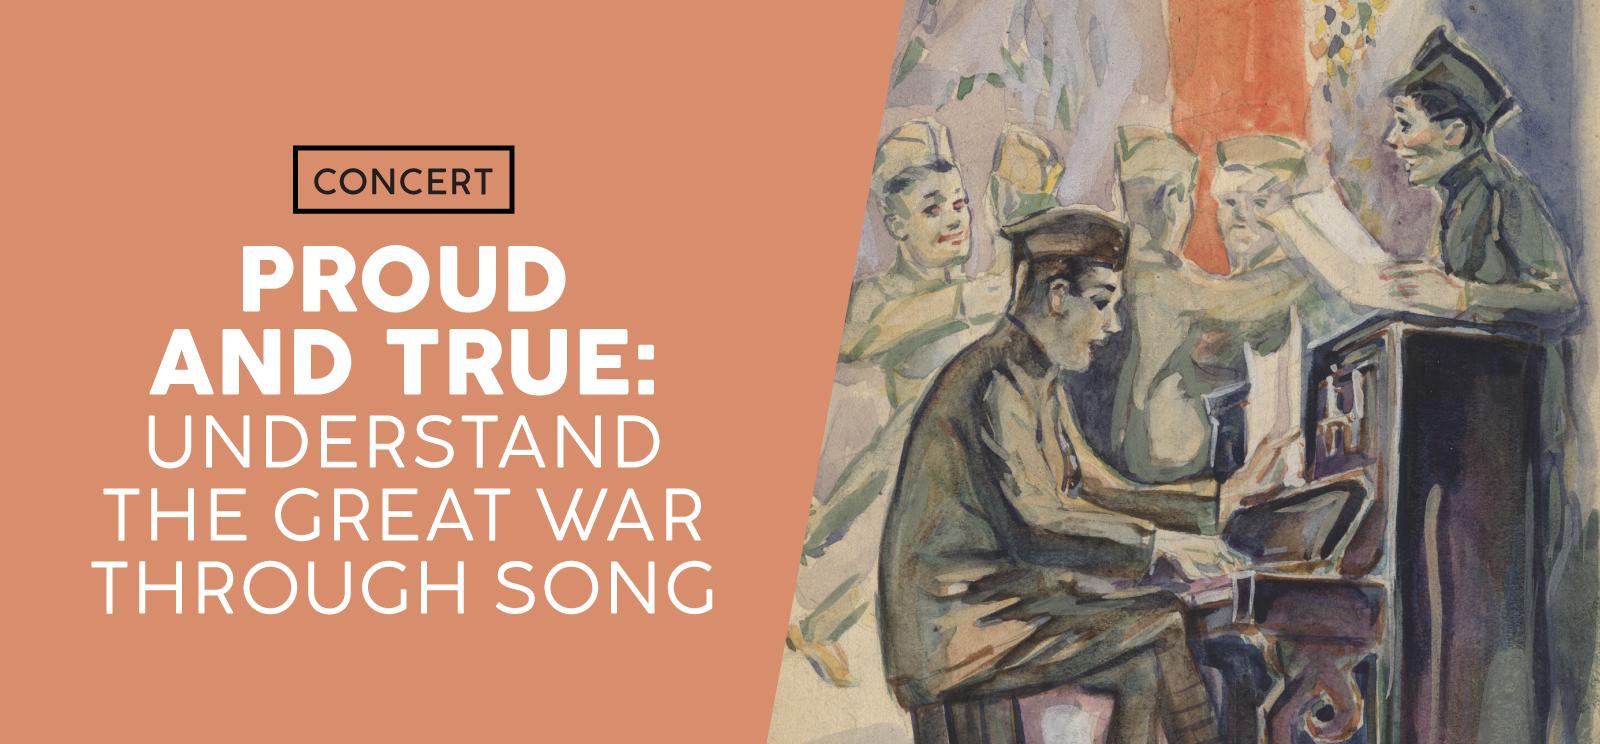 Image: Watercolor sketch of two WWI soldiers. One is seated at an upright piano and singing. The other is leaning on the piano with a sheet of music in hand and singing. Text: Proud and True: / Understand the Great War through Song